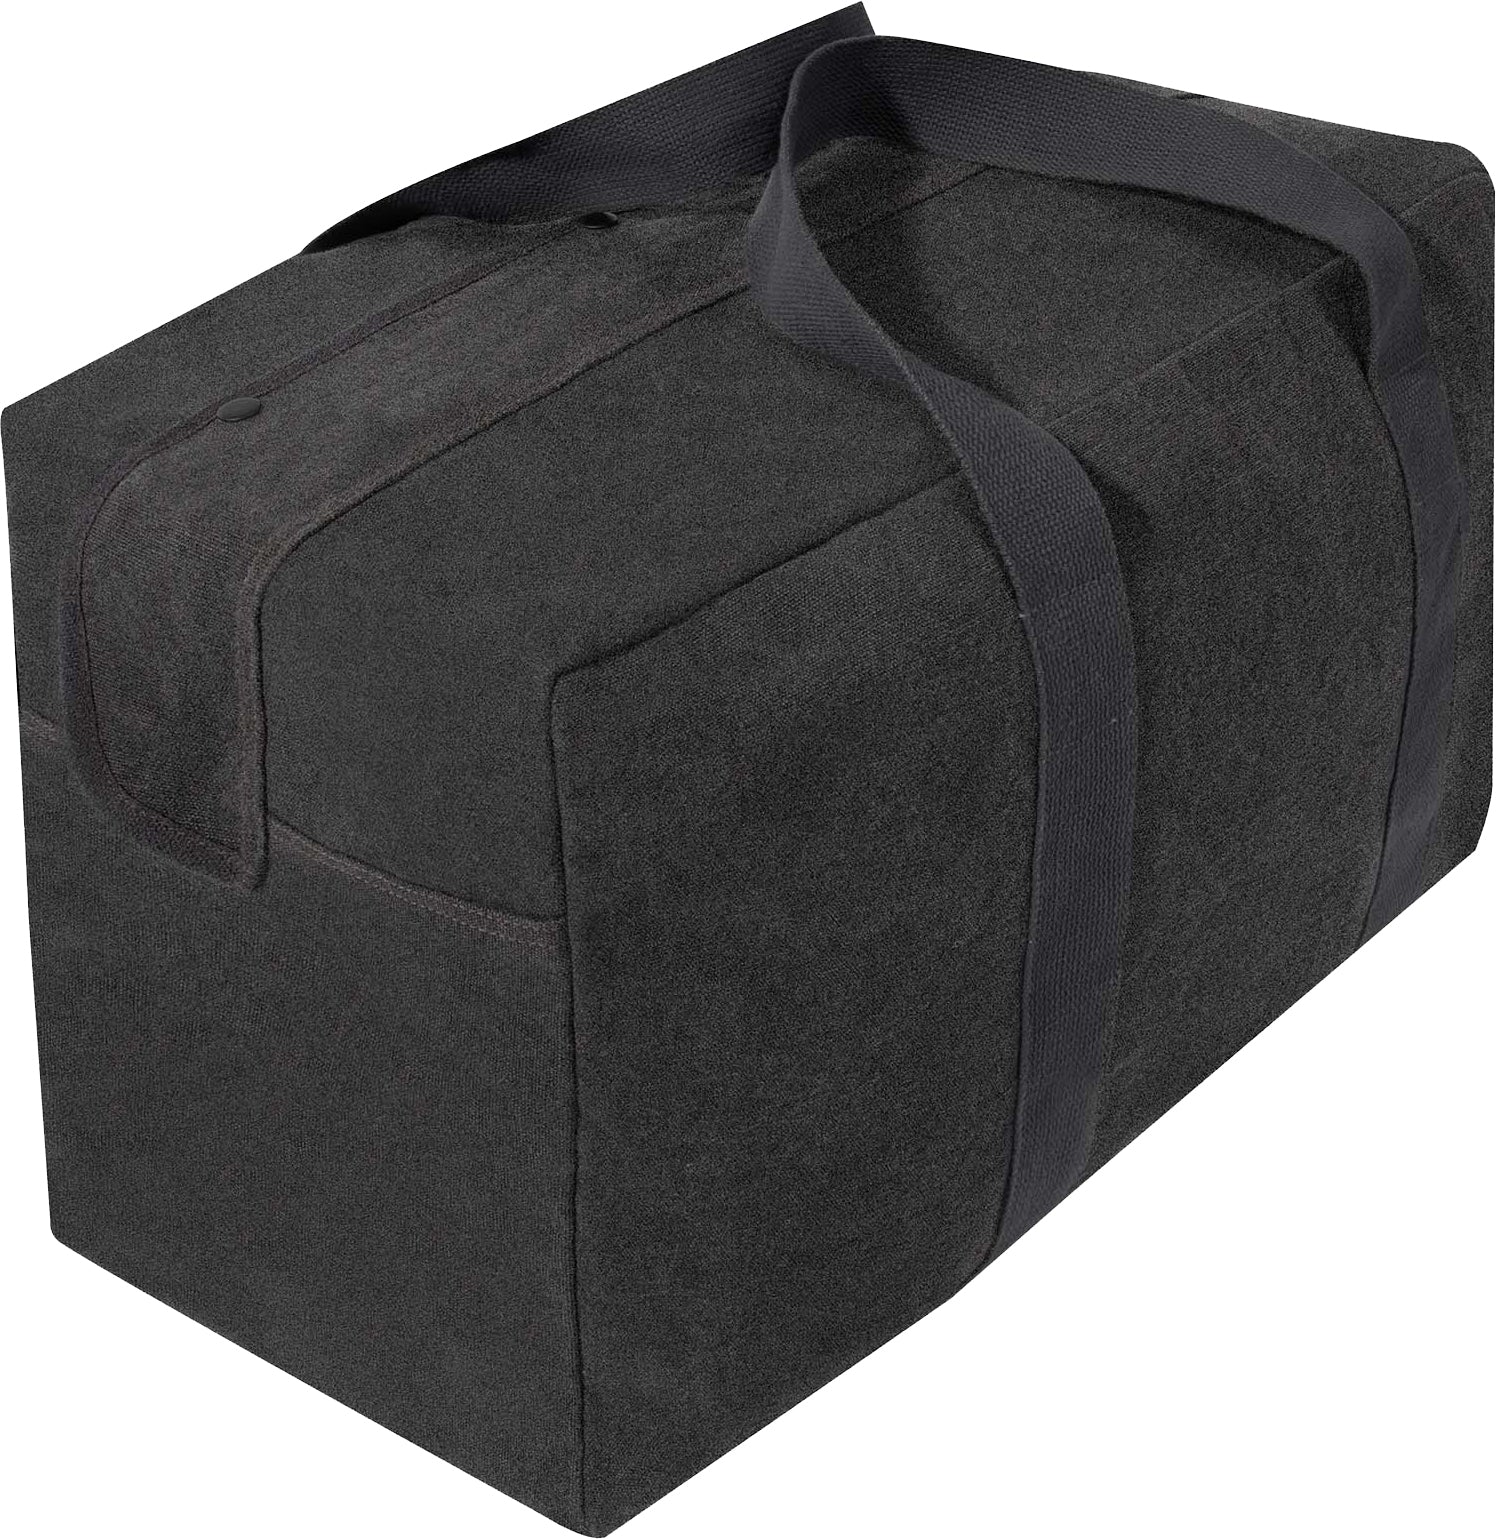 Shop Navy Top Load Duffle Bags - Fatigues Army Navy Gear